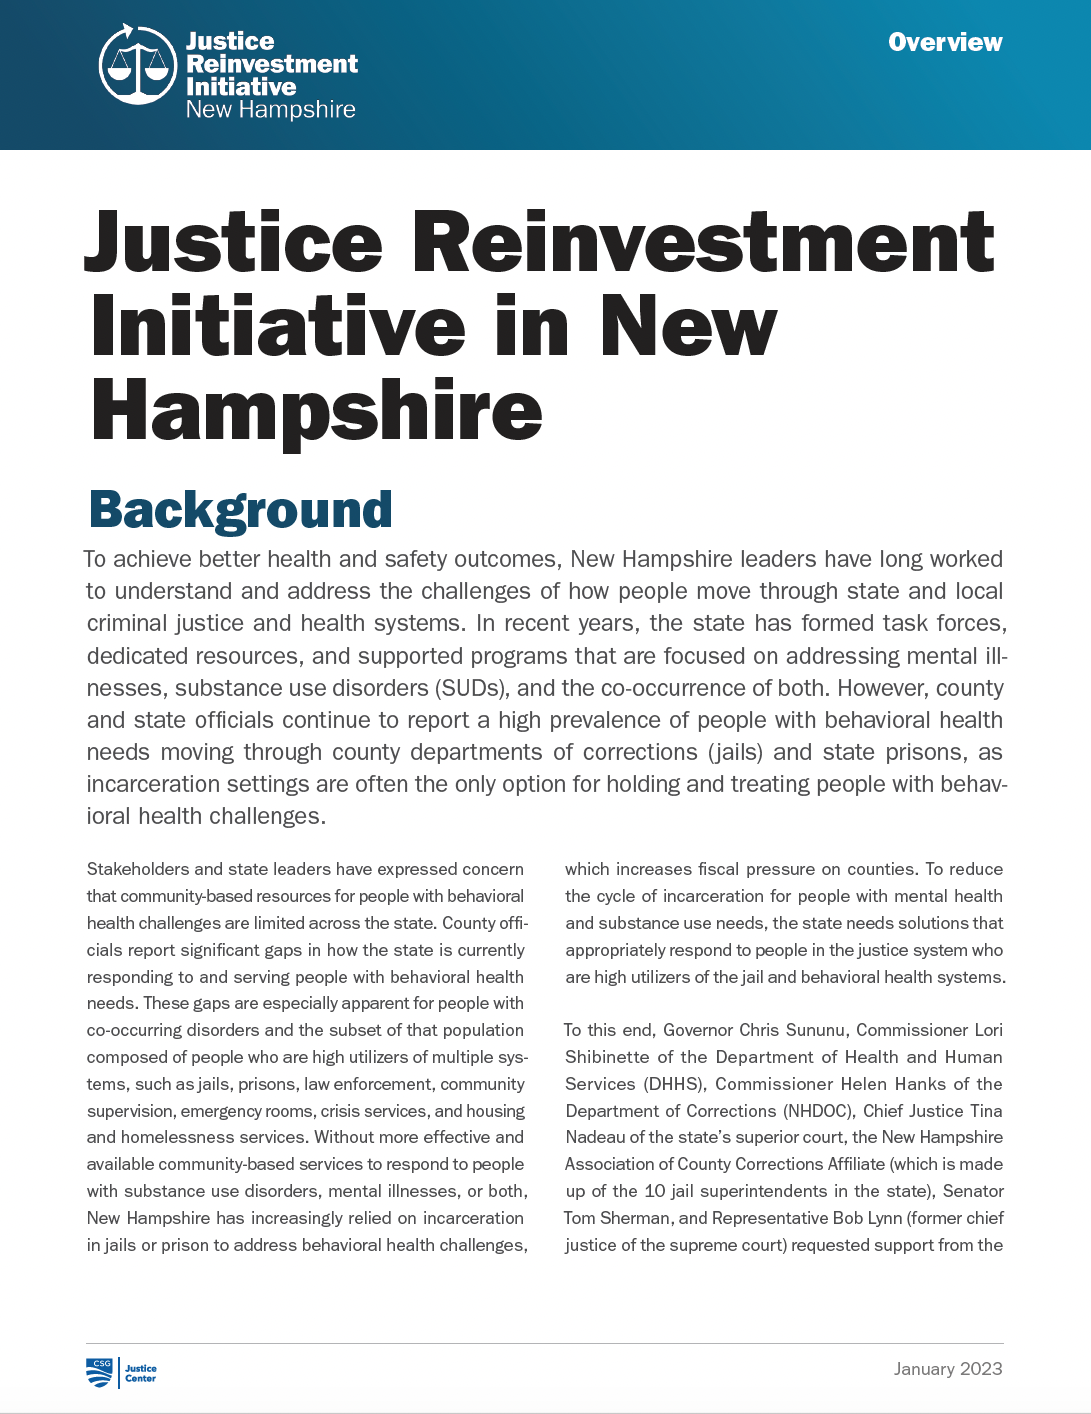 Justice Reinvestment Initiative in New Hampshire